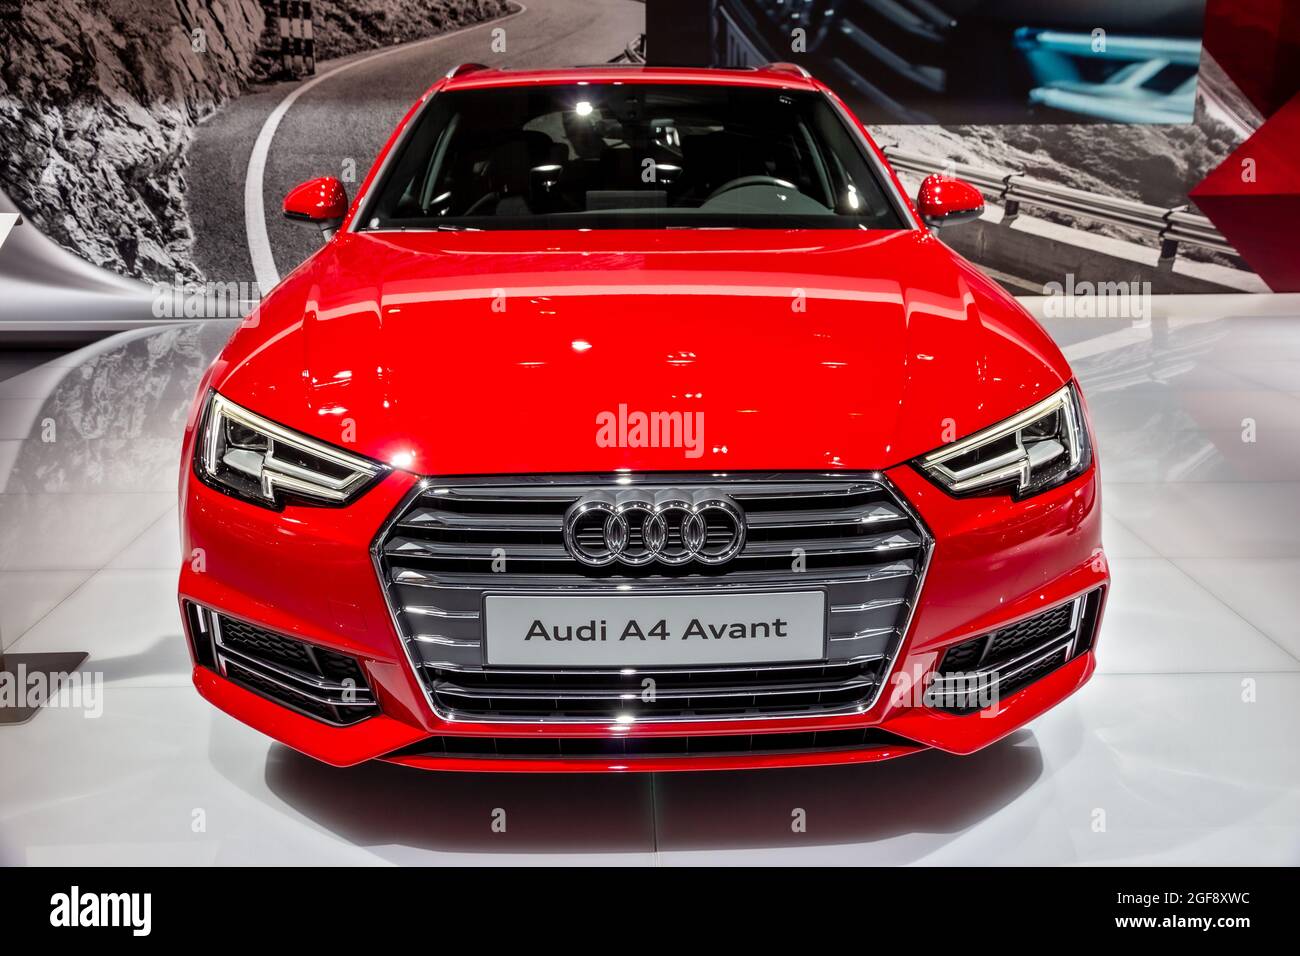 Audi A4 Avant car presented at the Brussels Expo Autosalon motor show. Belgium - January 12, 2016 Stock Photo